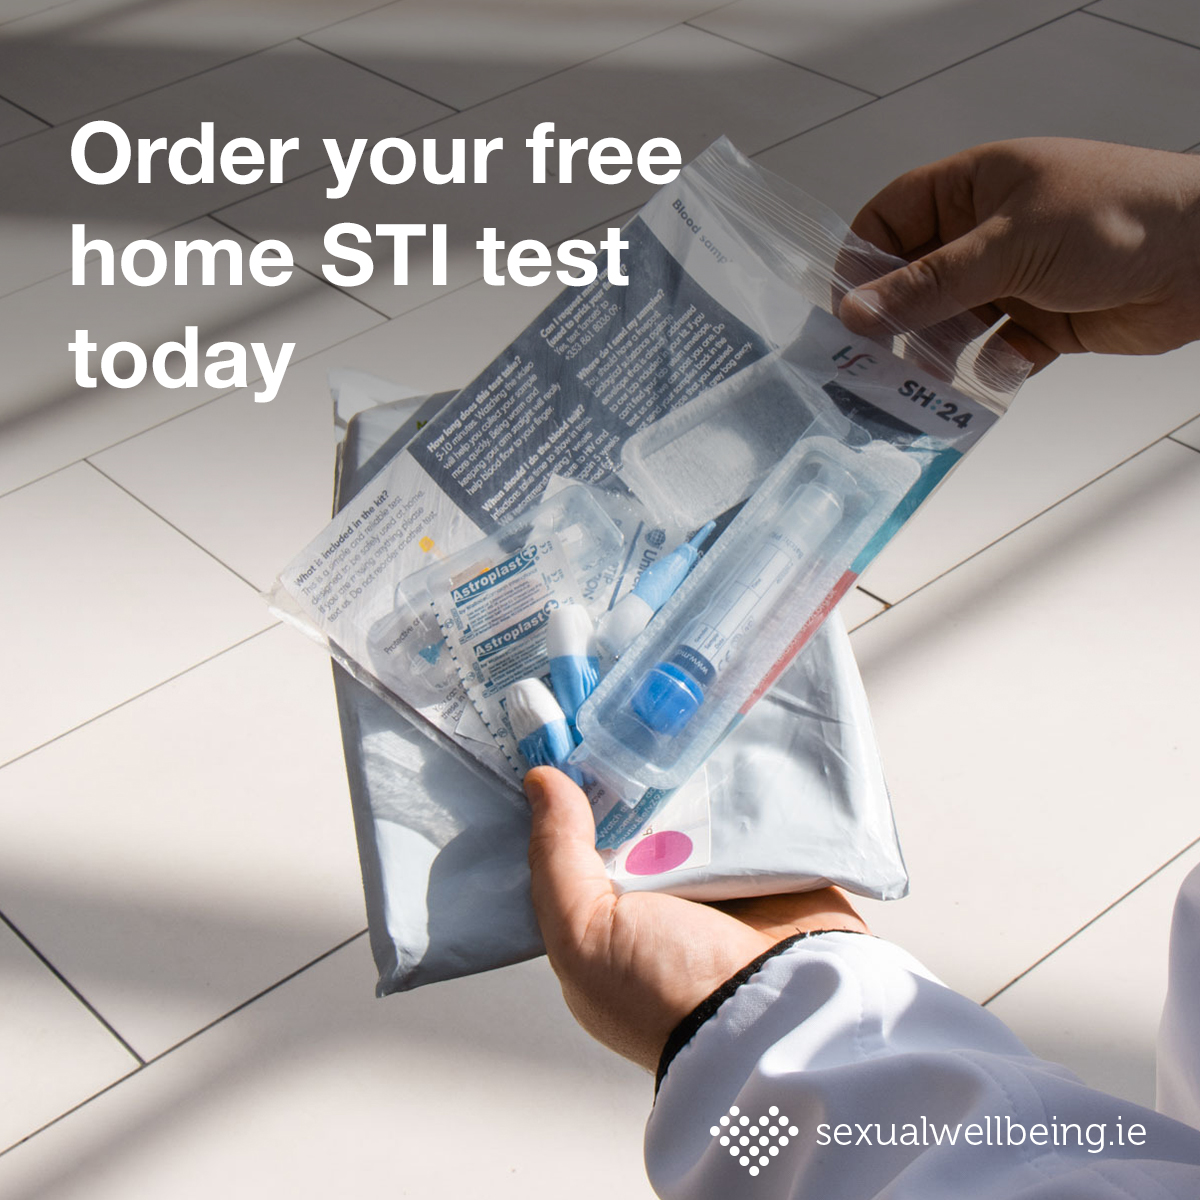 In 2023 there were 119,000 free home STI tests ordered in the Republic of Ireland. Remember it’s easy, free and discrete. Order yours today at sexualwellbeing.ie #STItest